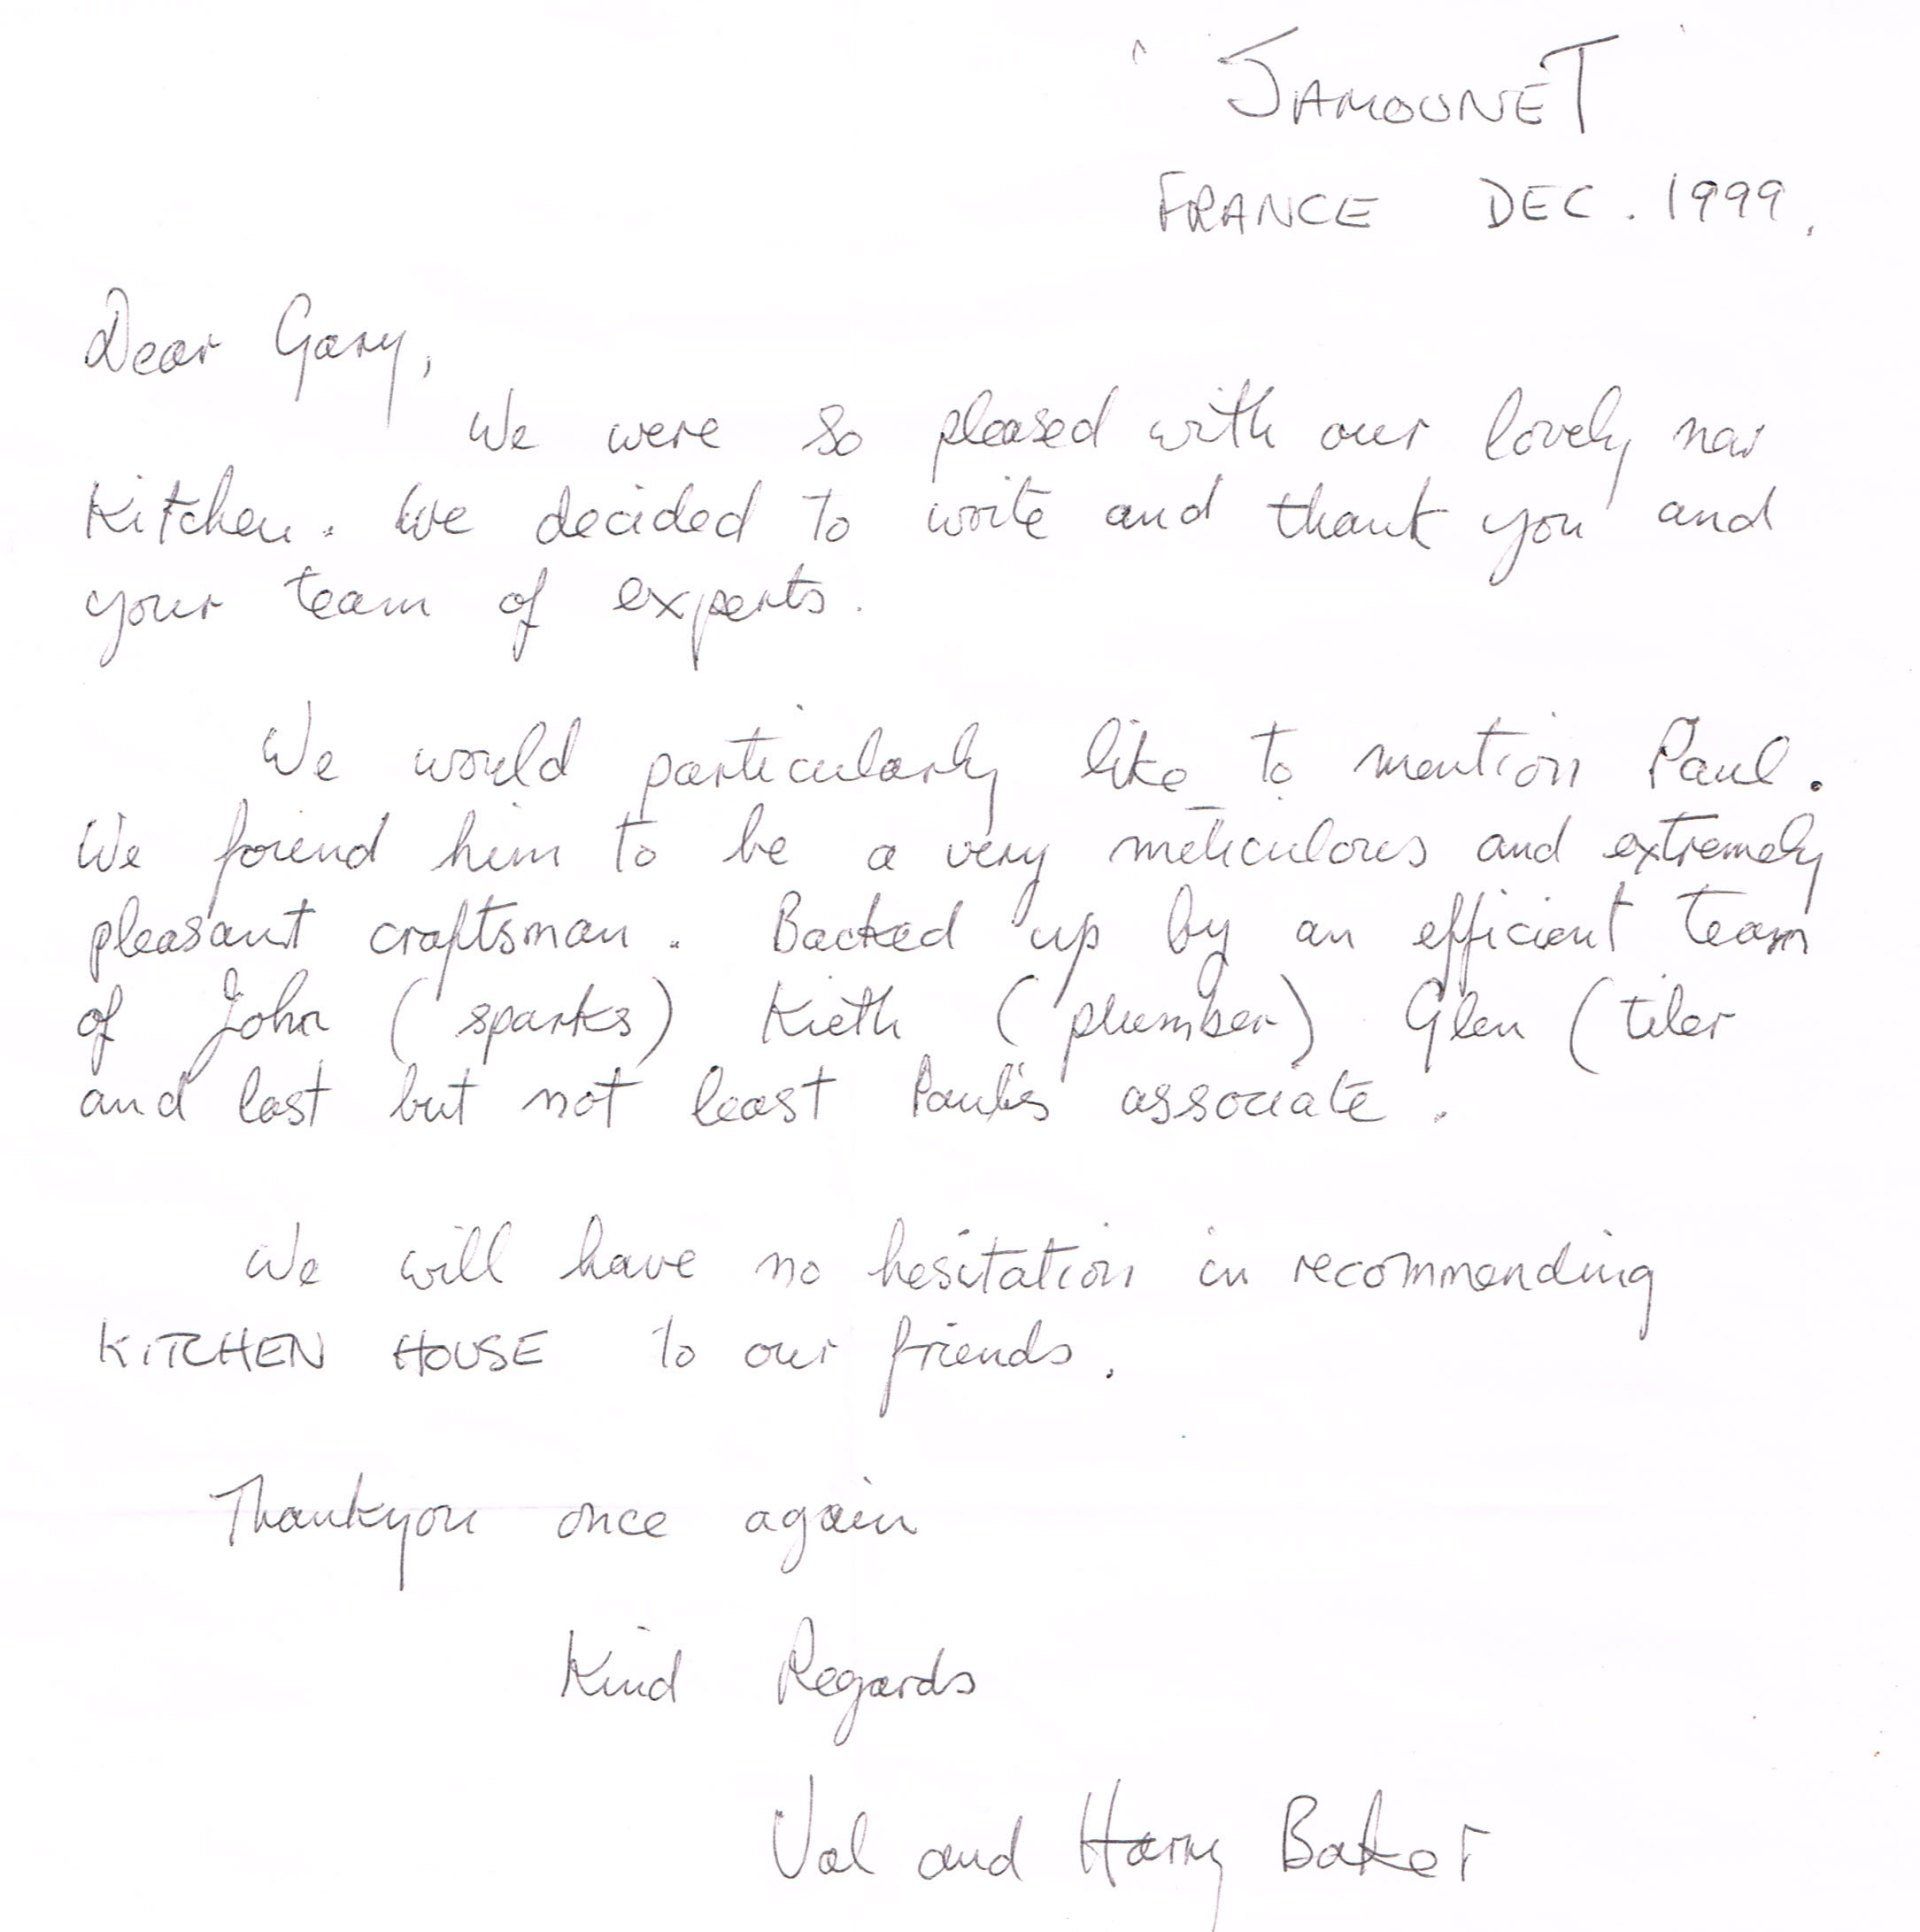 testimonial from Val and Harry Baker, 1999